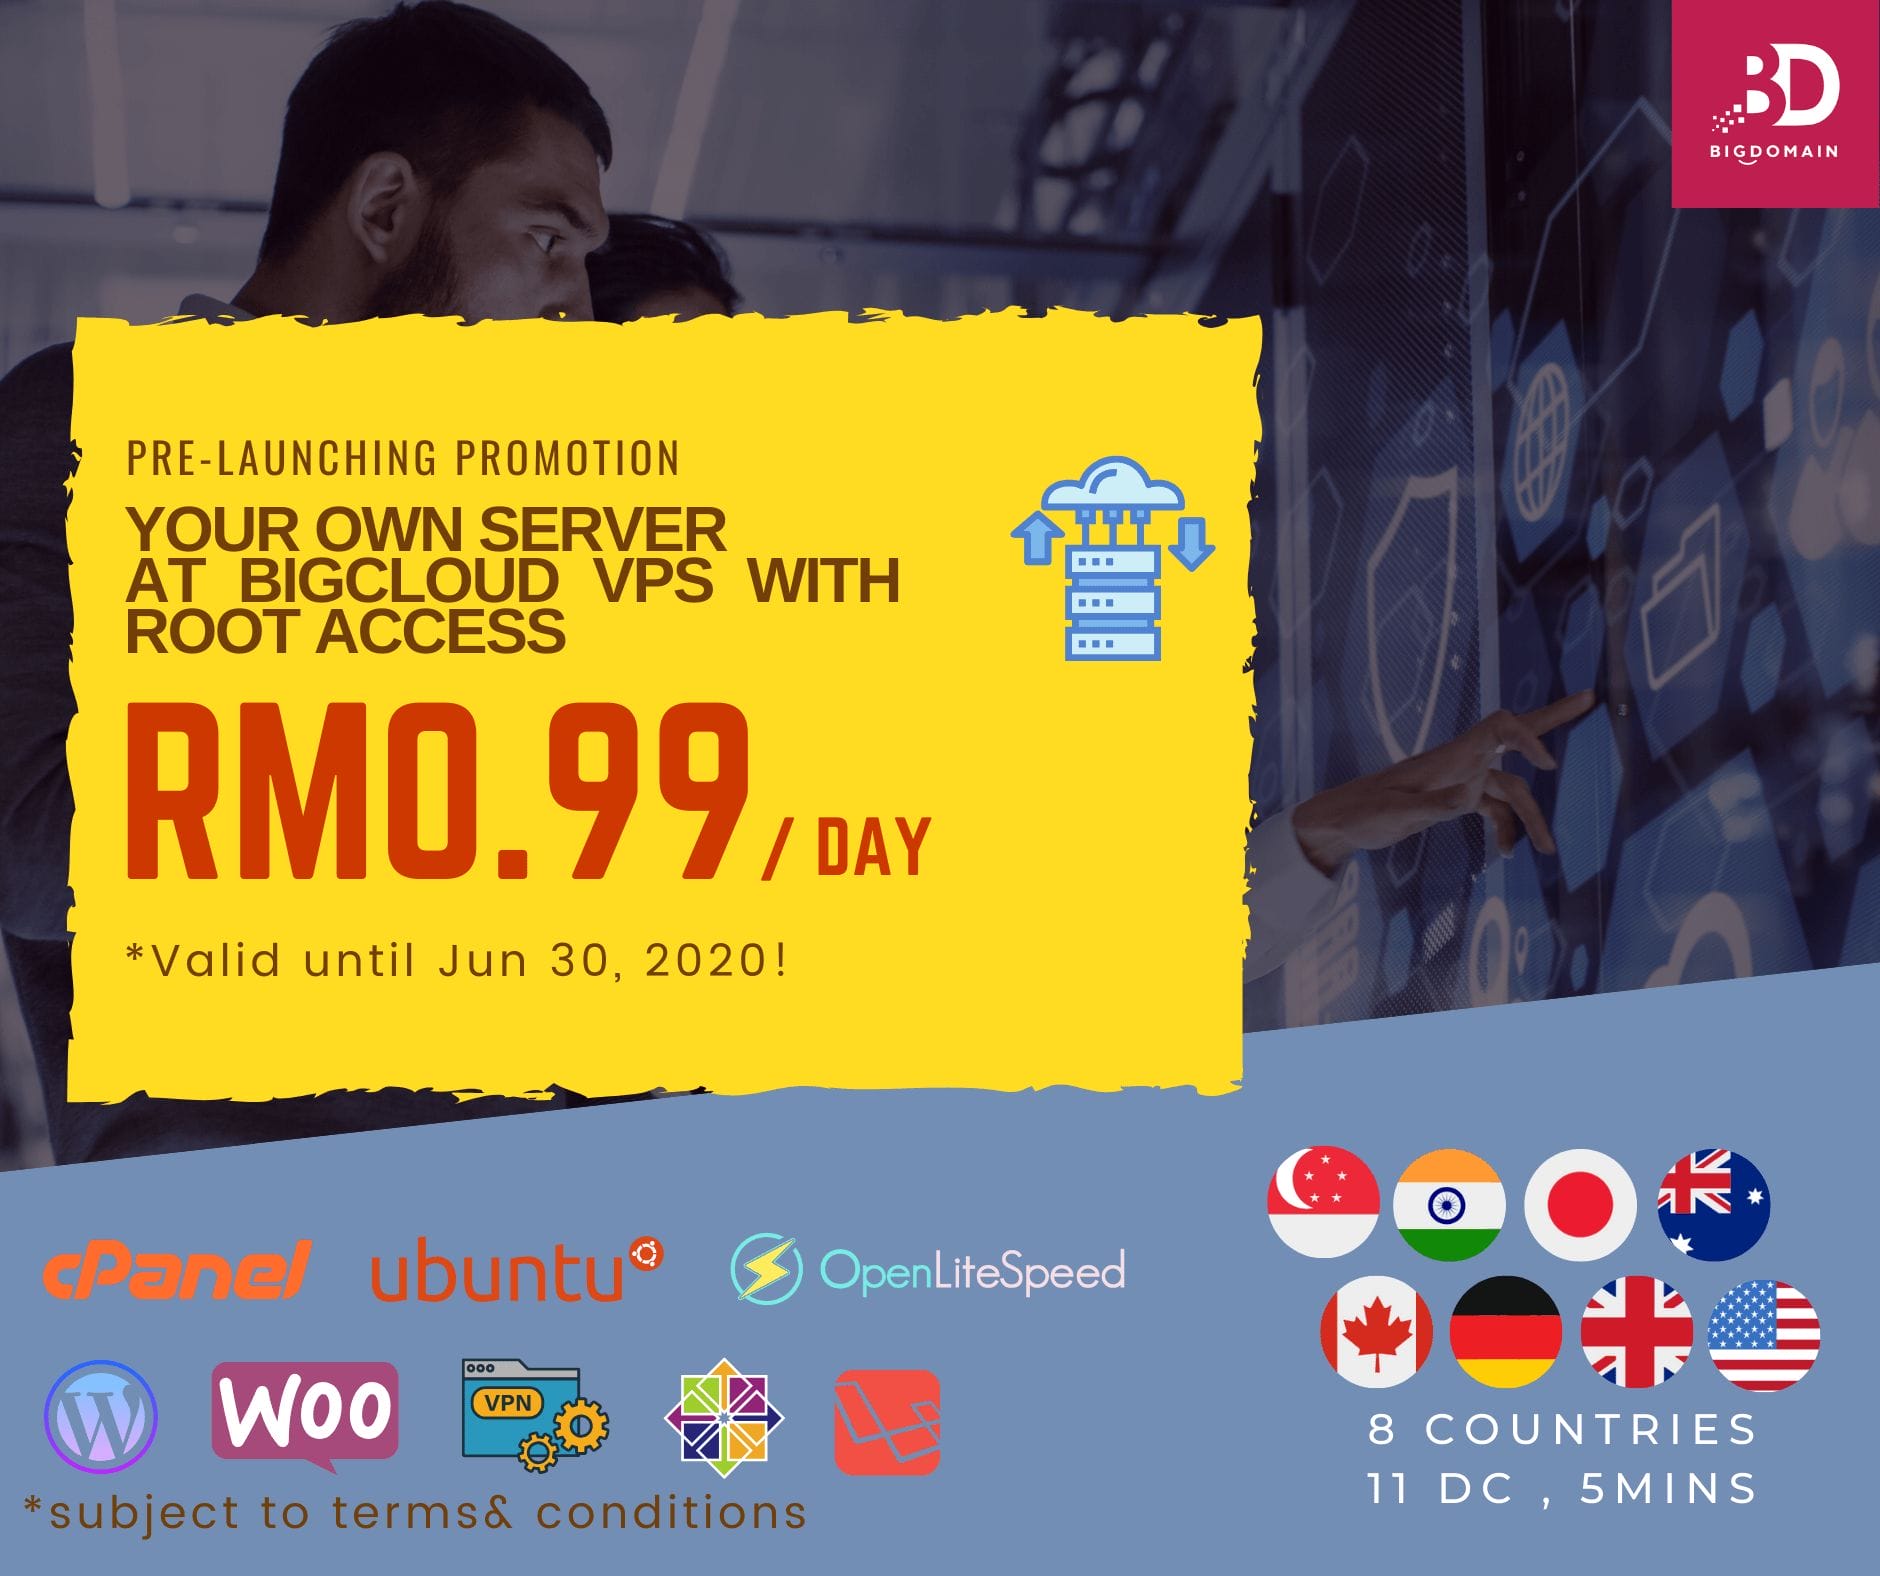 Malaysia & Singapore Server | BigDomain BigCloud VPS Private Cloud Servers Offer from RM0.99